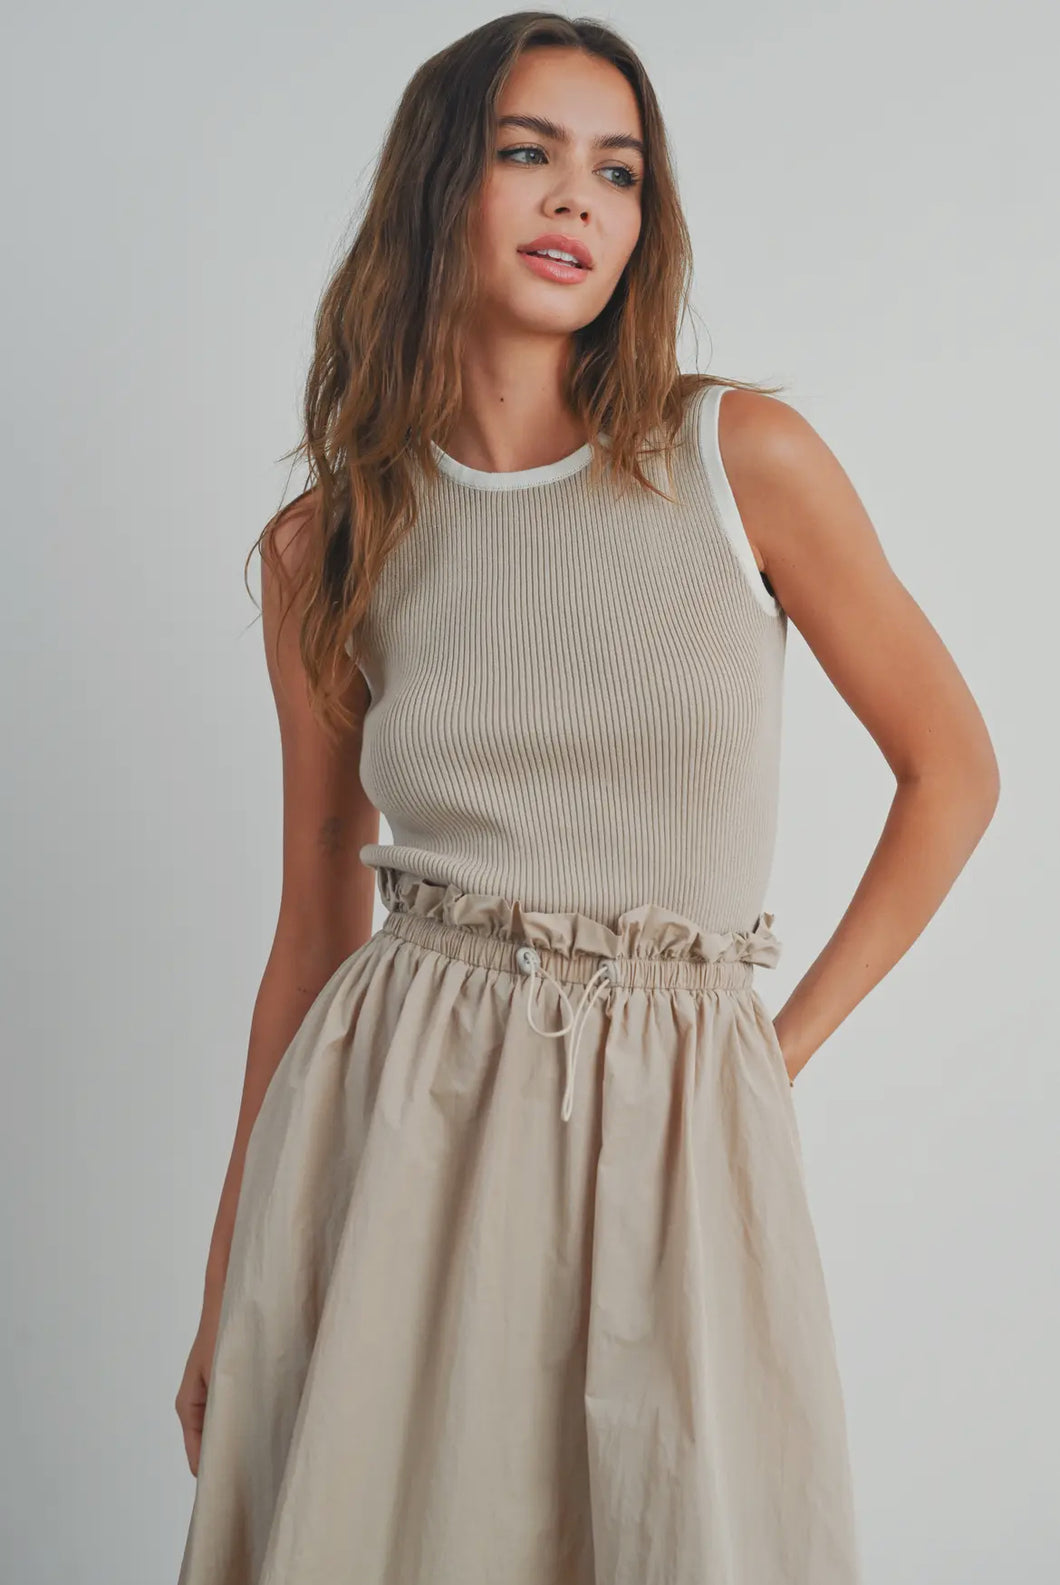 The Bella Contrast Nylon Dress in Taupe